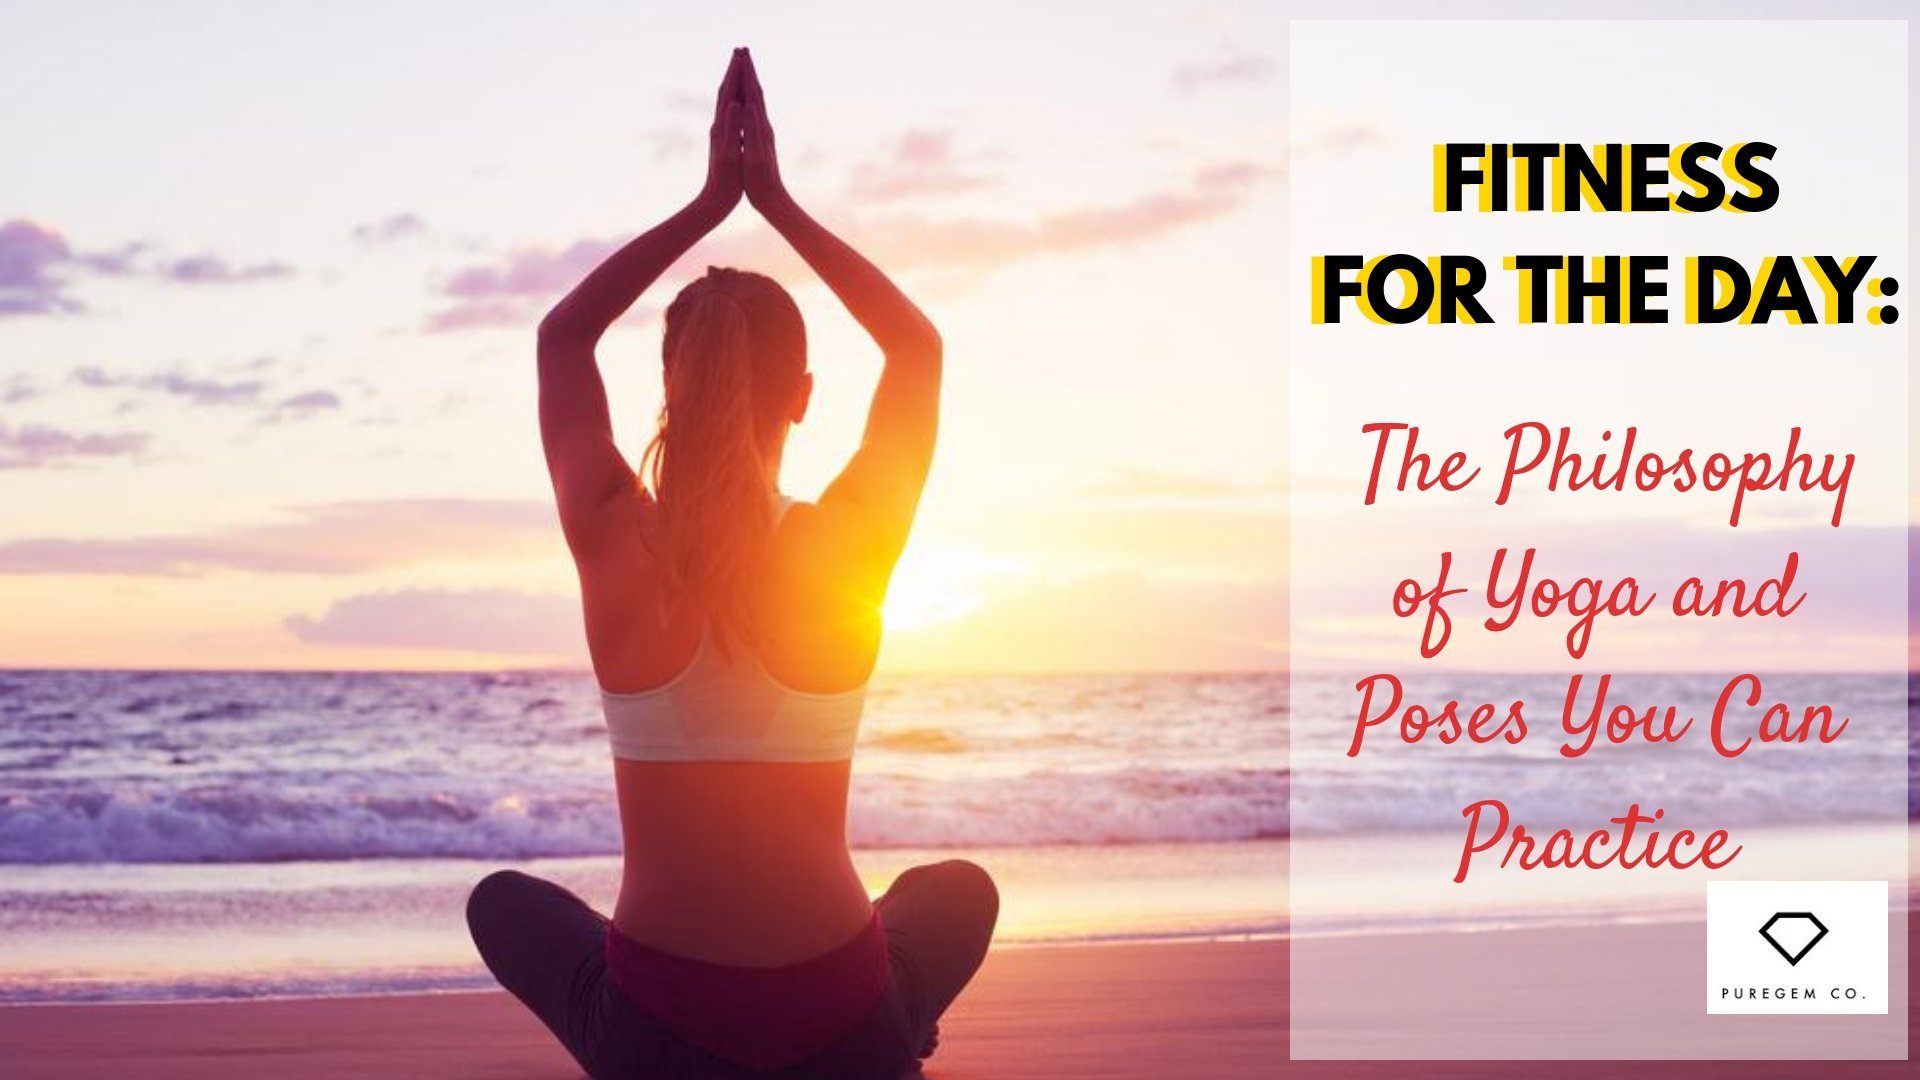 Fitness for the Day: The Philosophy of Yoga and Poses You Can Practice